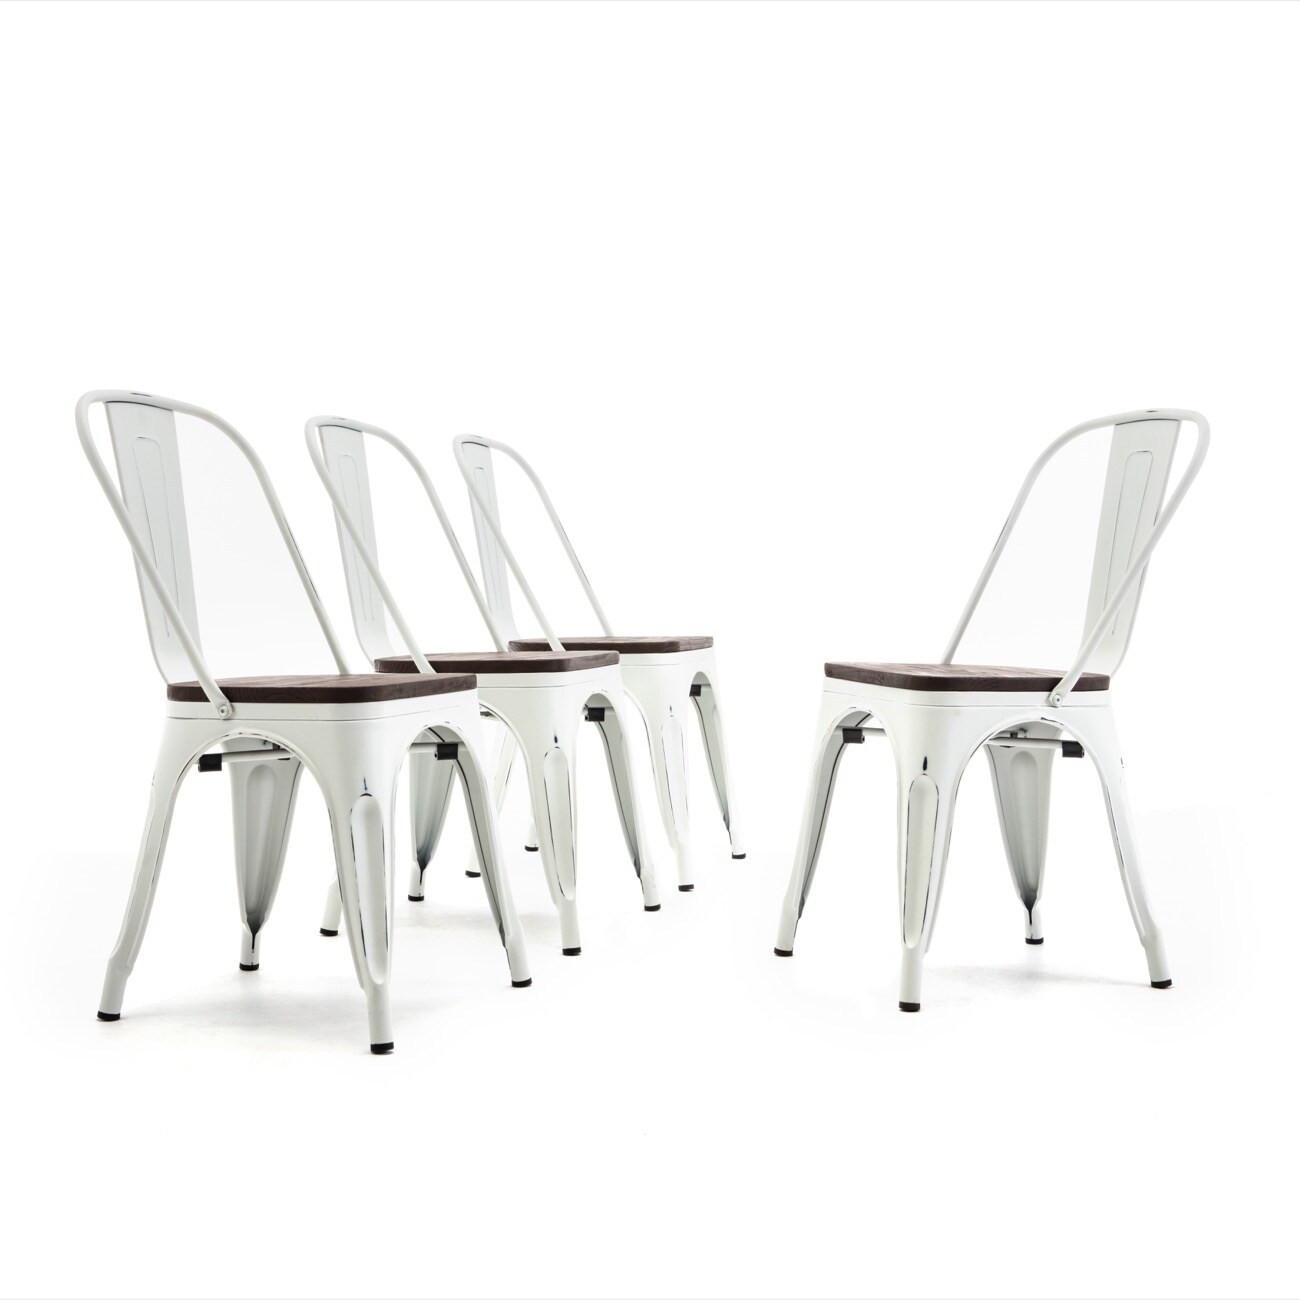 Antique White 4 Set of Metal Bistro Cafe Modern Style Dining Chairs Stackable